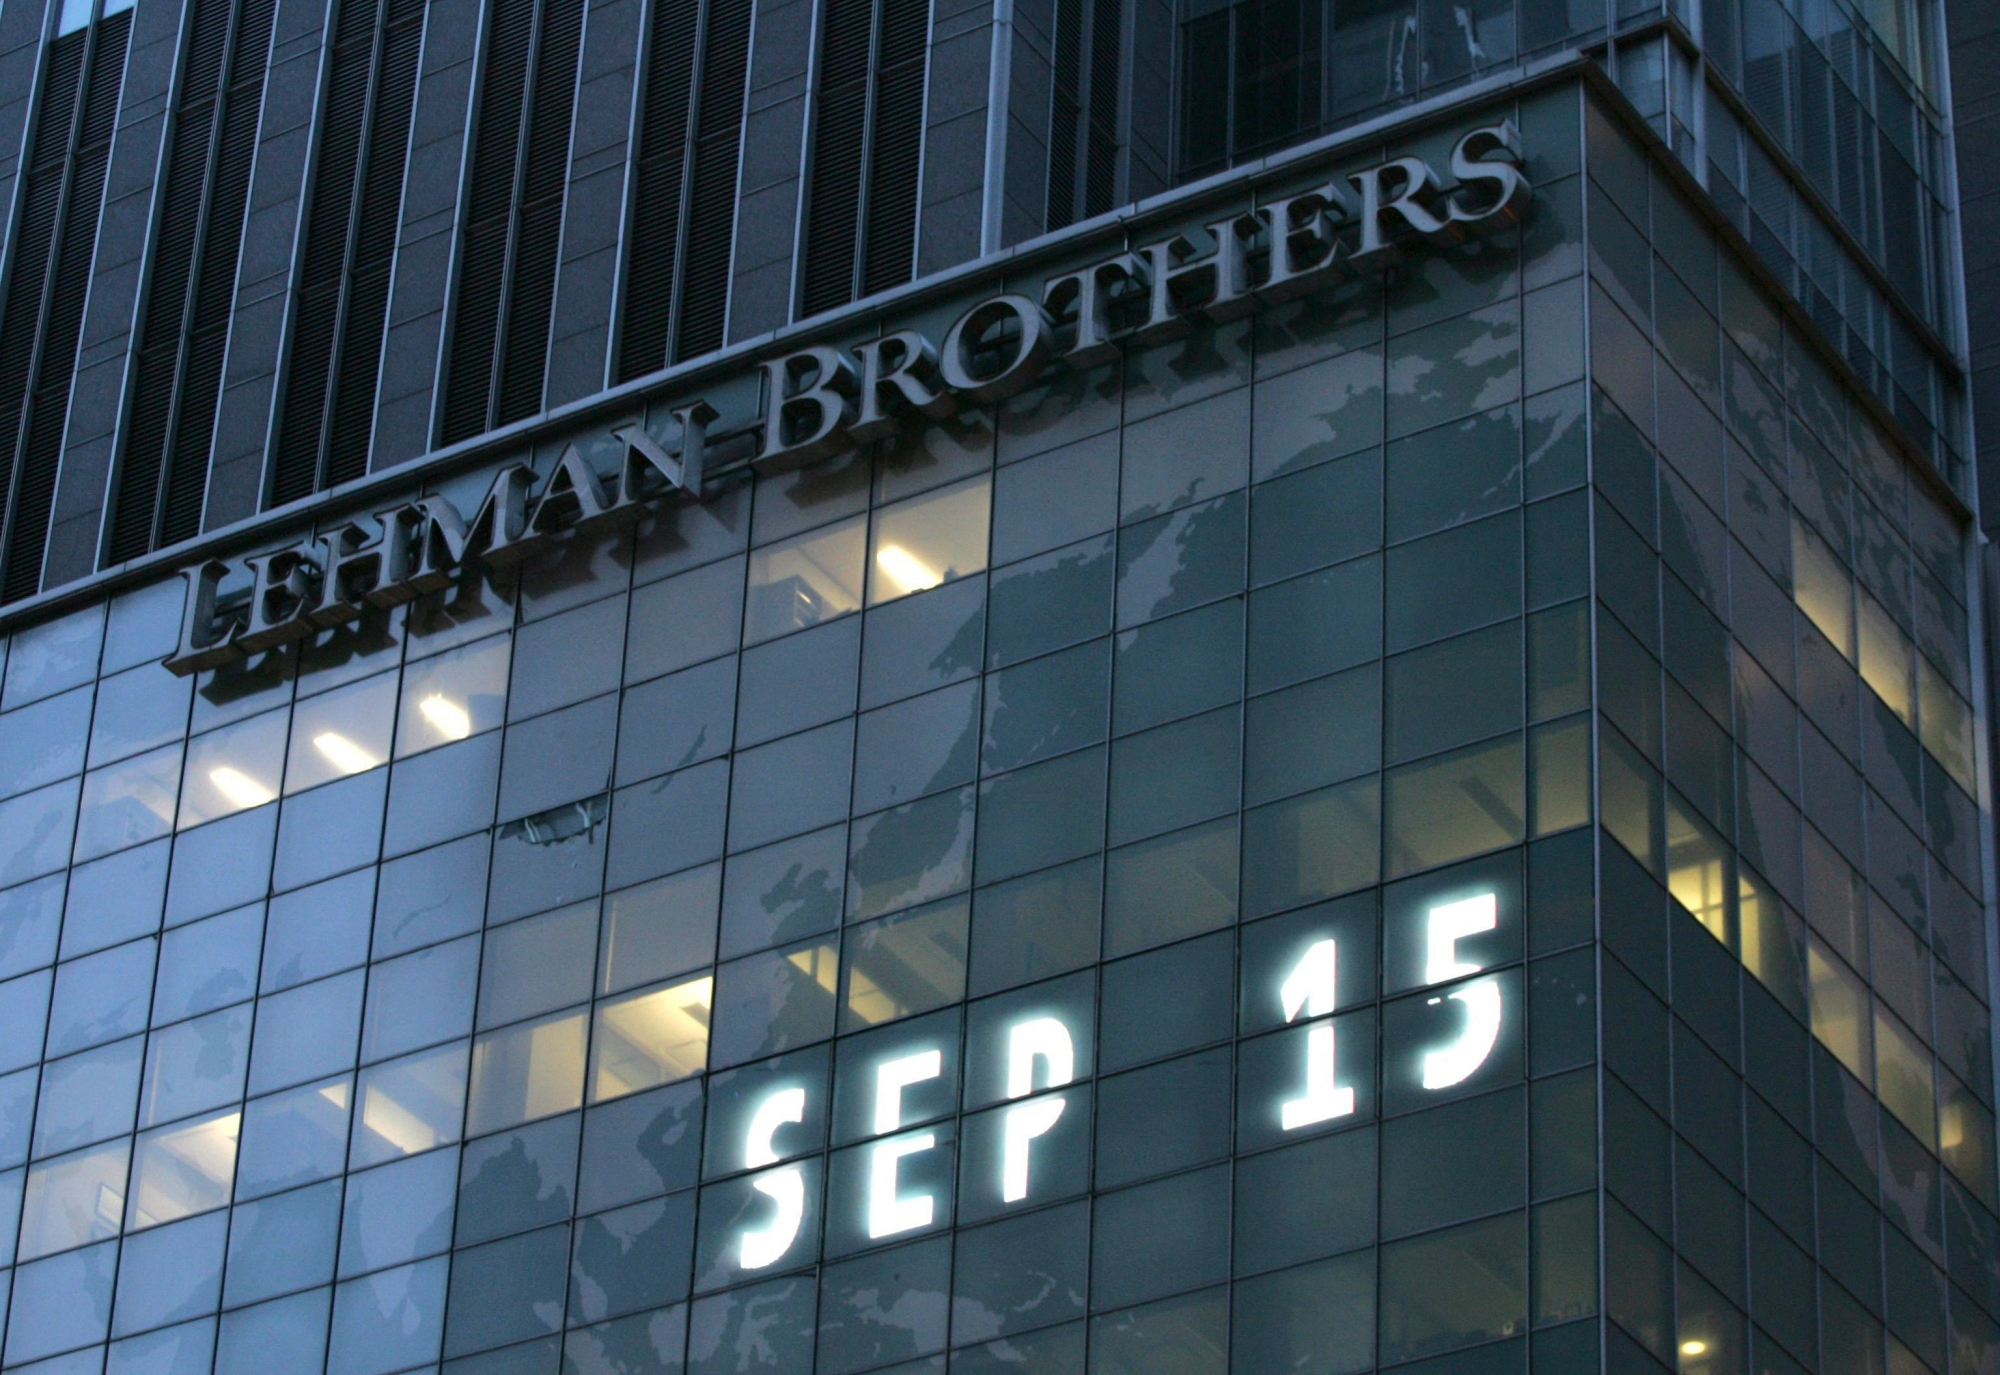 ADVANCE FOR SUNDAY, OCT. 6, 2013 - FILE - This Sept. 15, 2008 file photo, shows the Lehman Brothers's world headquarter in New York.  Lehman Brothers collapsed Sept. 15, 2008, triggering the financial crisis. (AP Photo/Mark Lennihan, file) Great Reset Glance